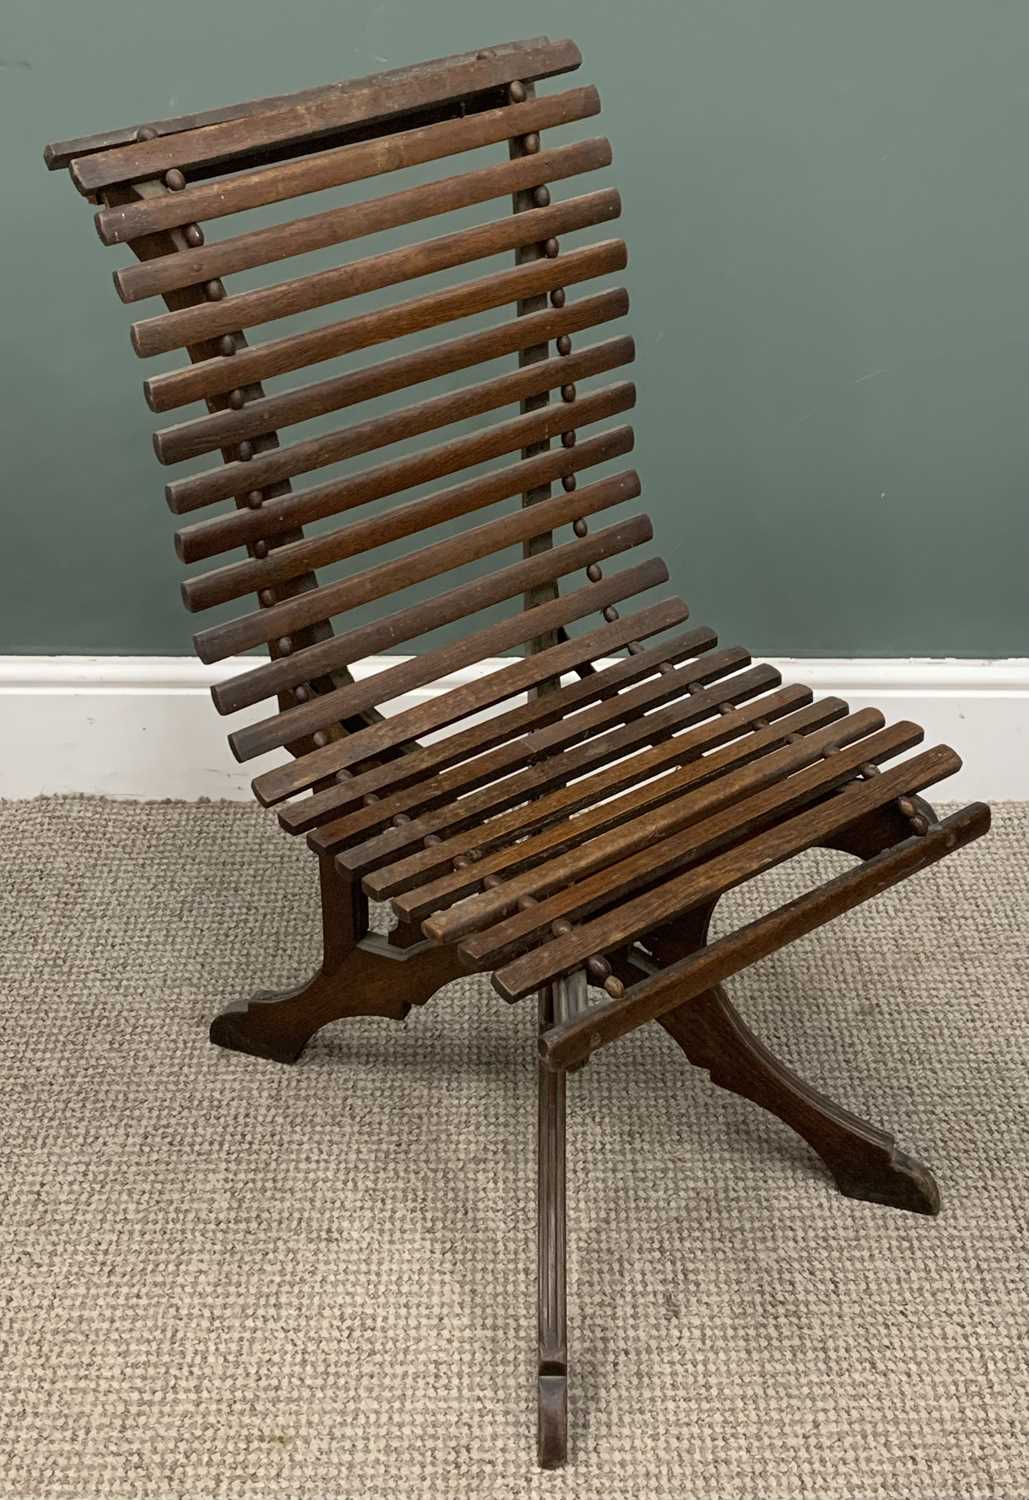 THREE ITEMS OF VINTAGE FURNITURE including unusual chair with slatted seat and a barley twist oblong - Image 5 of 6